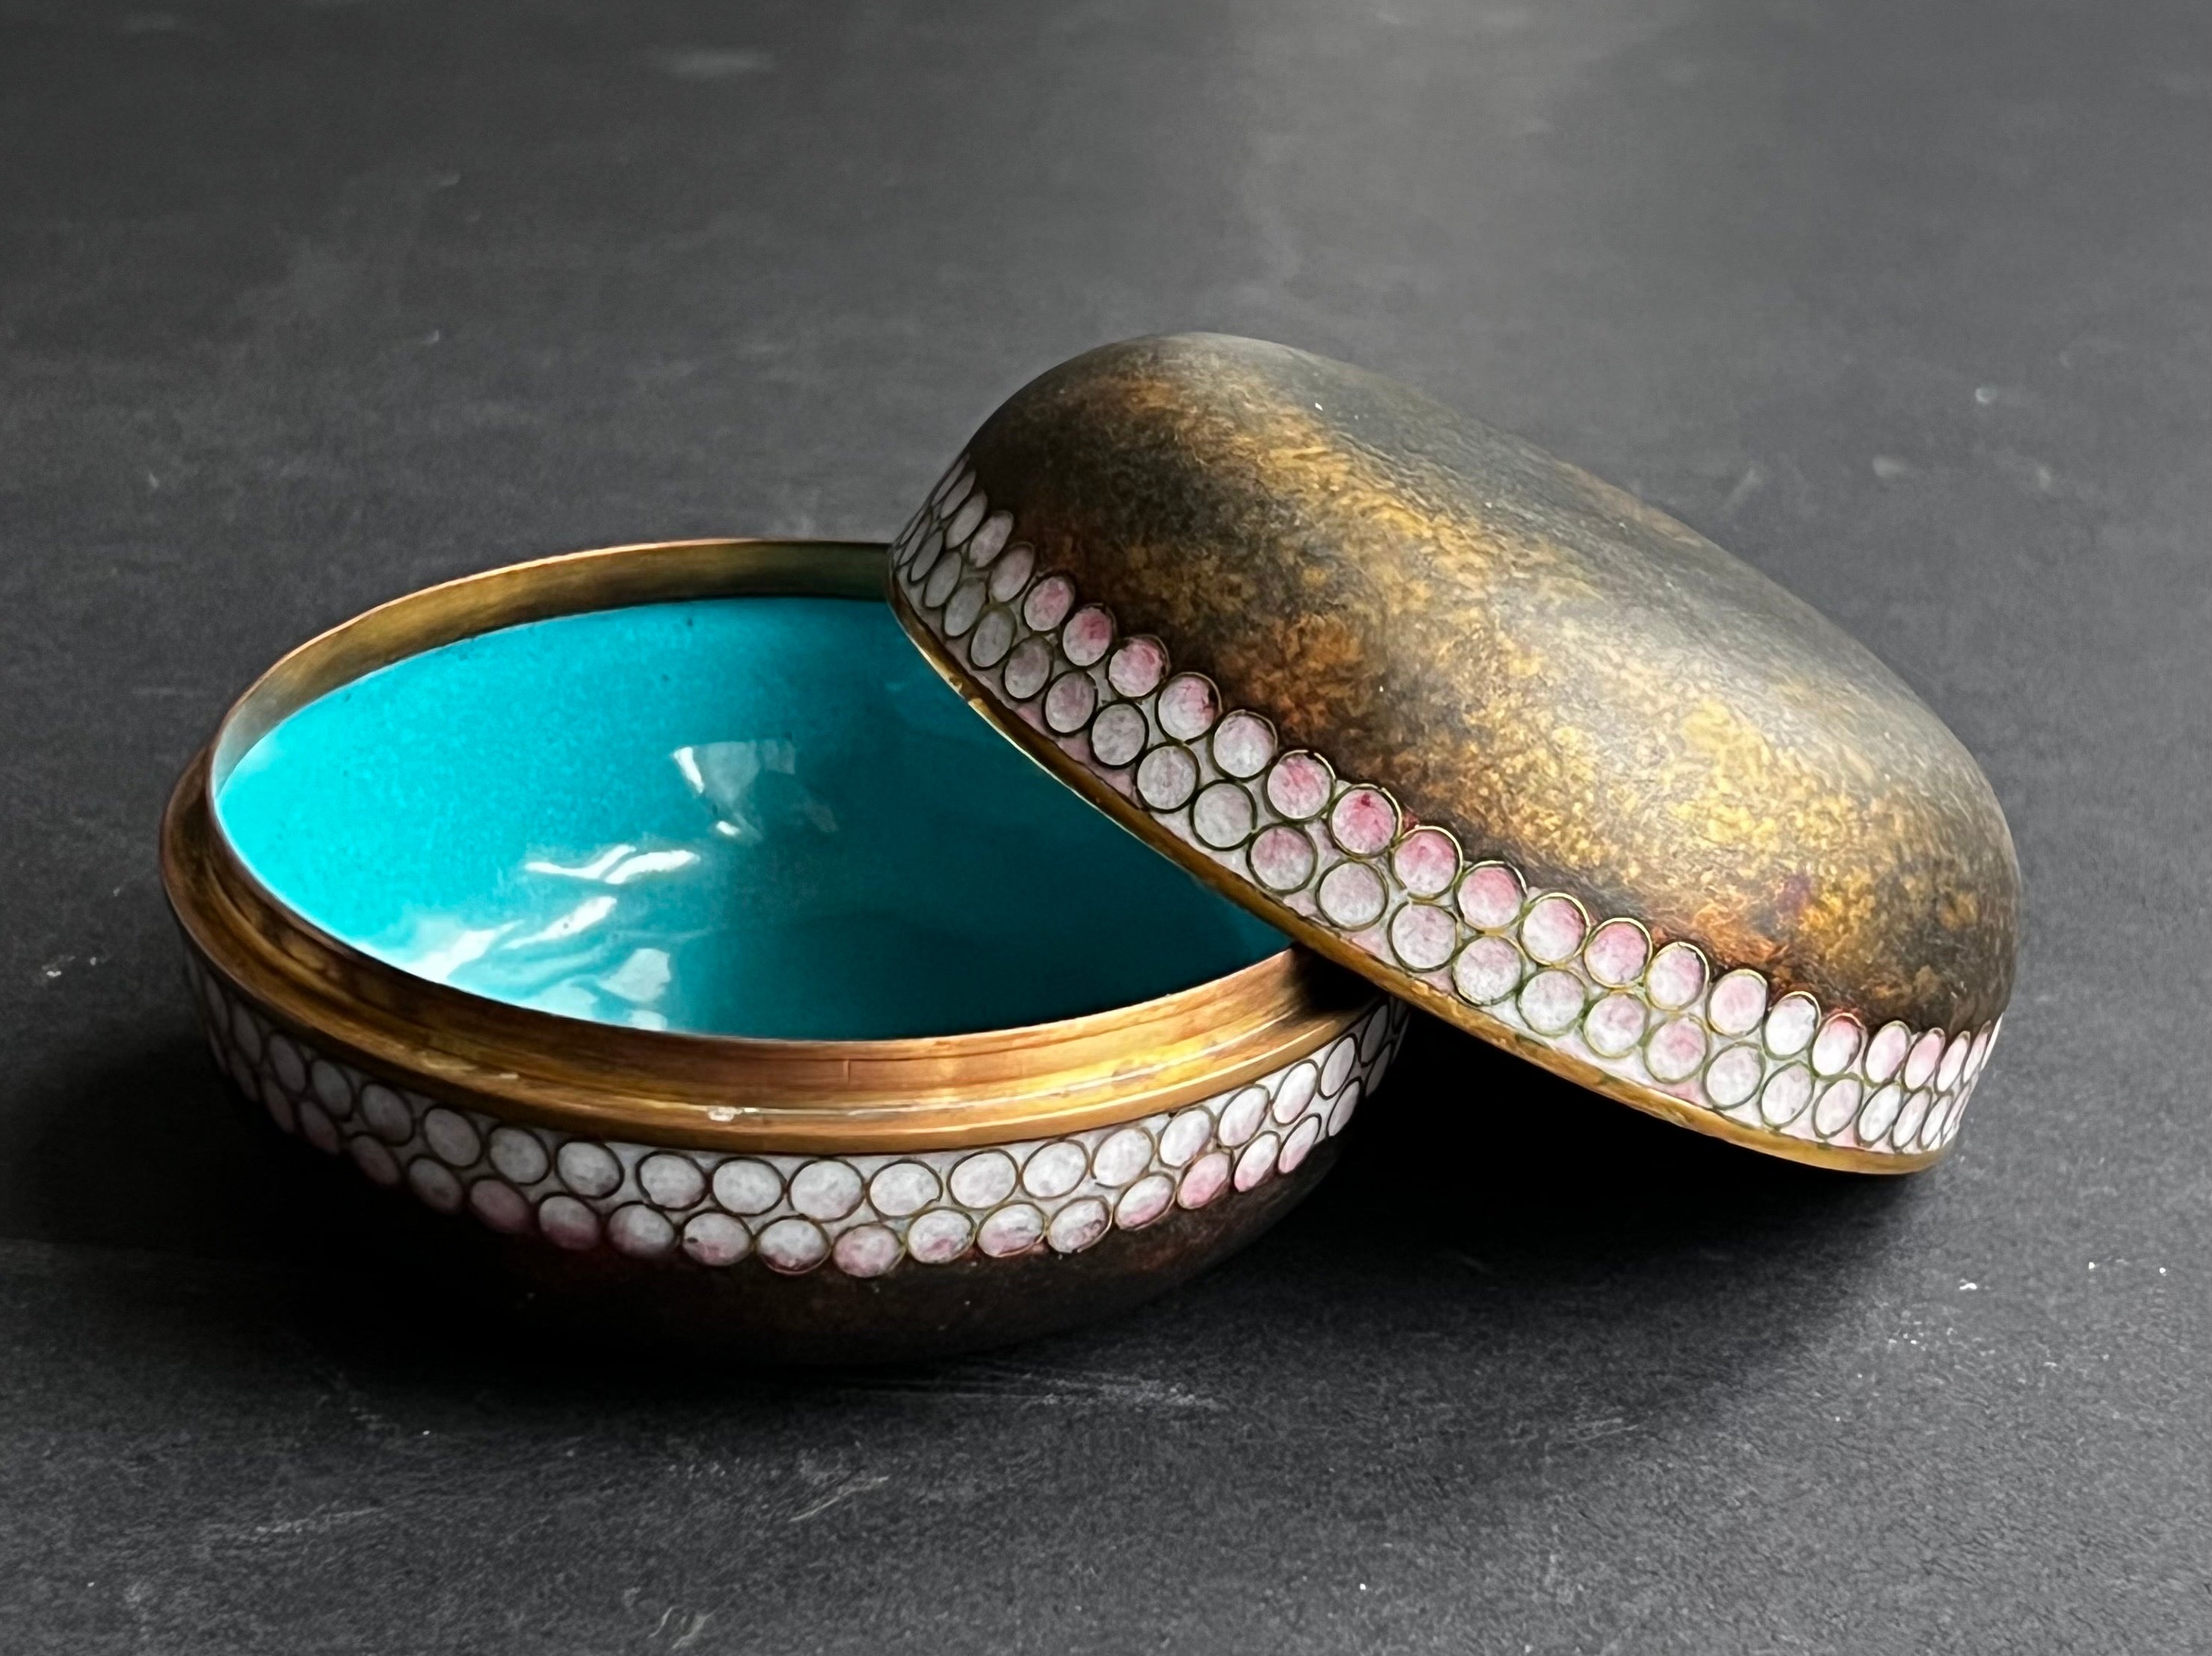 Cloisonné lidded box attributed to jeweller Käthe Ruckenbrod (1905 - 1989). Germany, mid-20th century.

The box is rounded, smooth and tactile to top and bottom; the enamel is golden brown with pale pink details to the outside, and rich turquoise